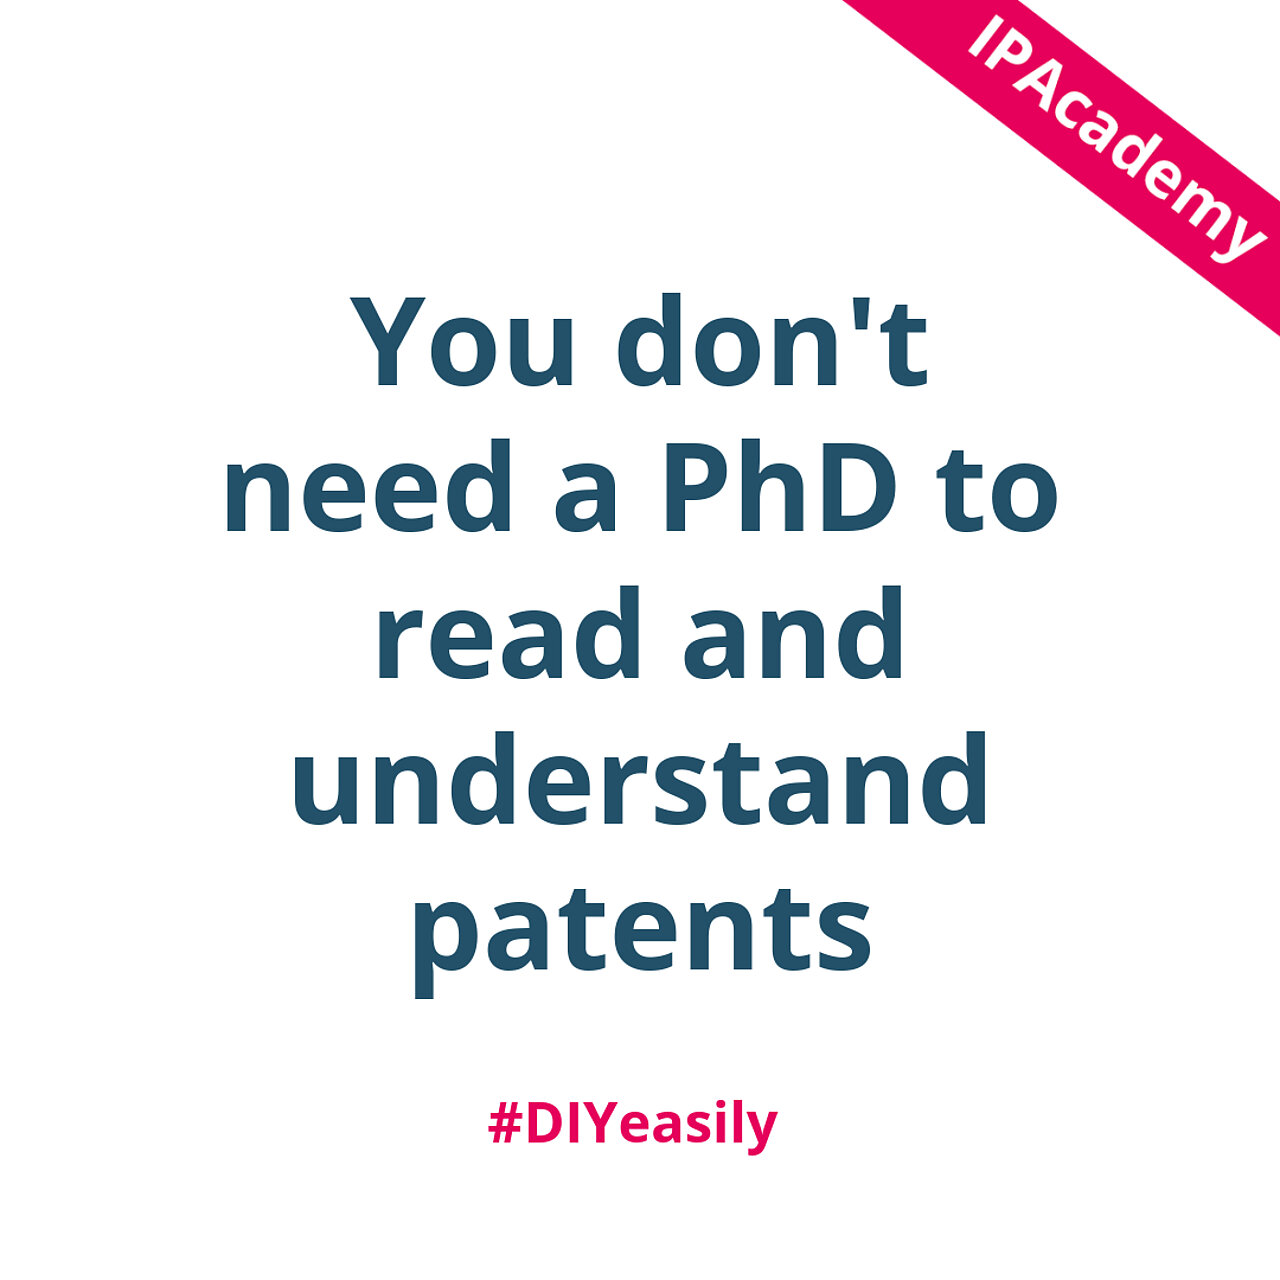 You don't need a PhD to read and understand patents.